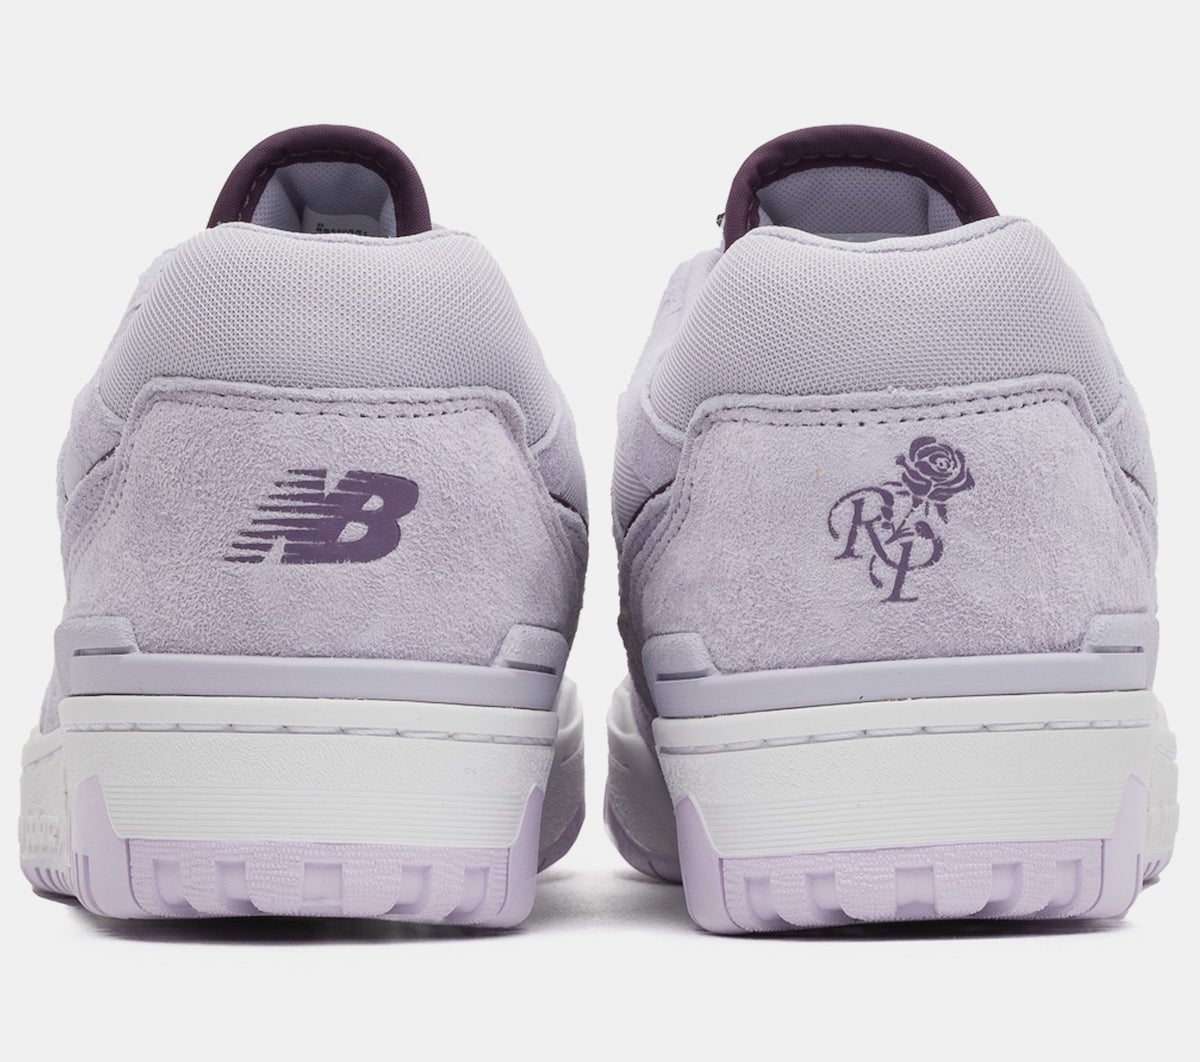 Rich Paul New Balance 550 Forever Yours Heel